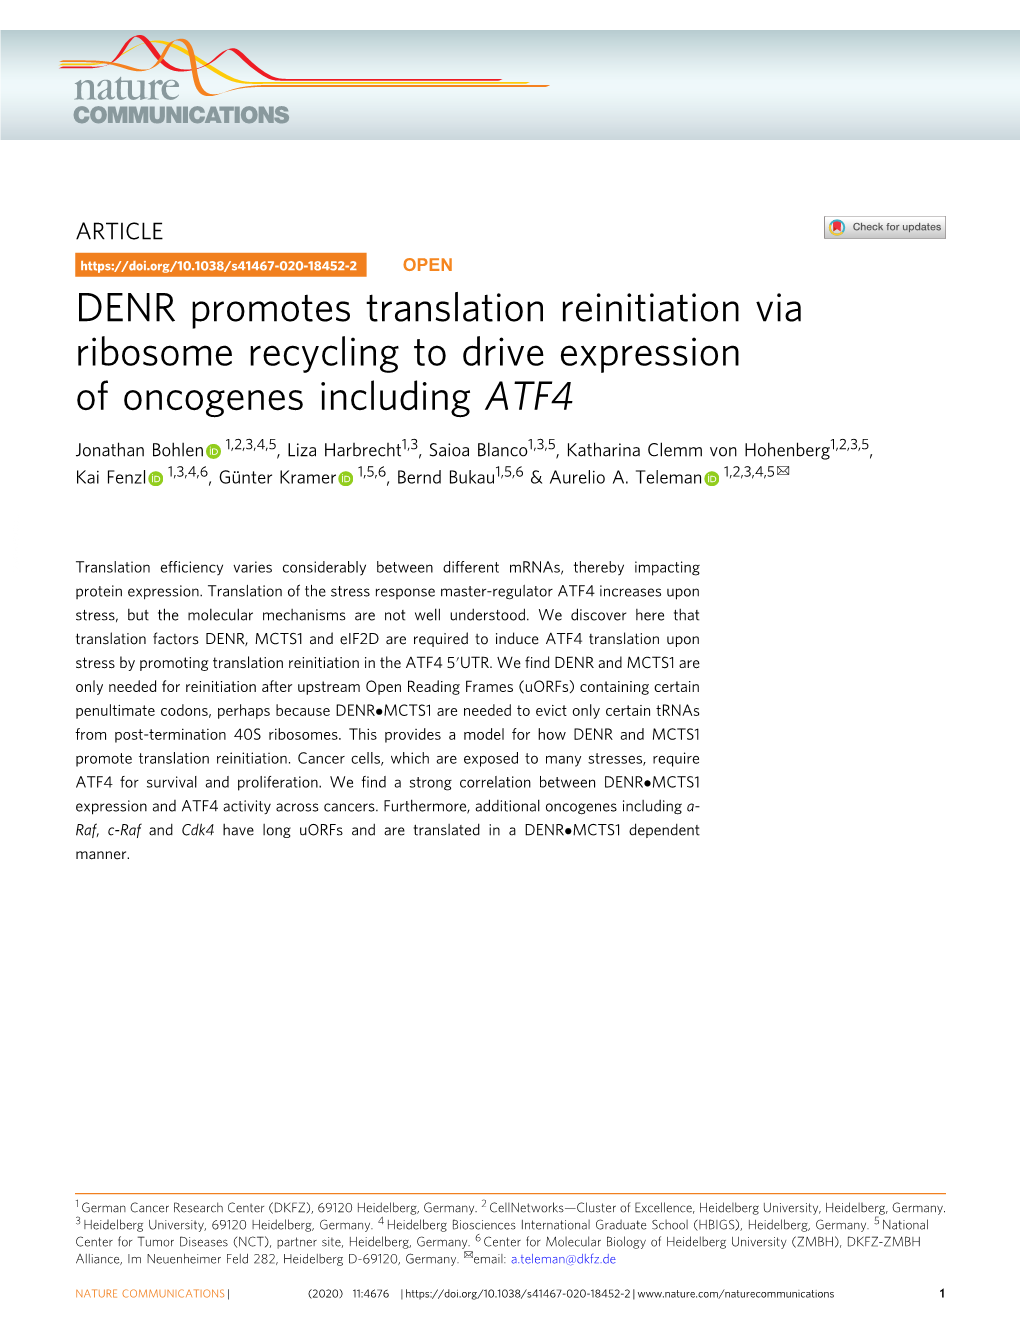 DENR Promotes Translation Reinitiation Via Ribosome Recycling to Drive Expression of Oncogenes Including ATF4